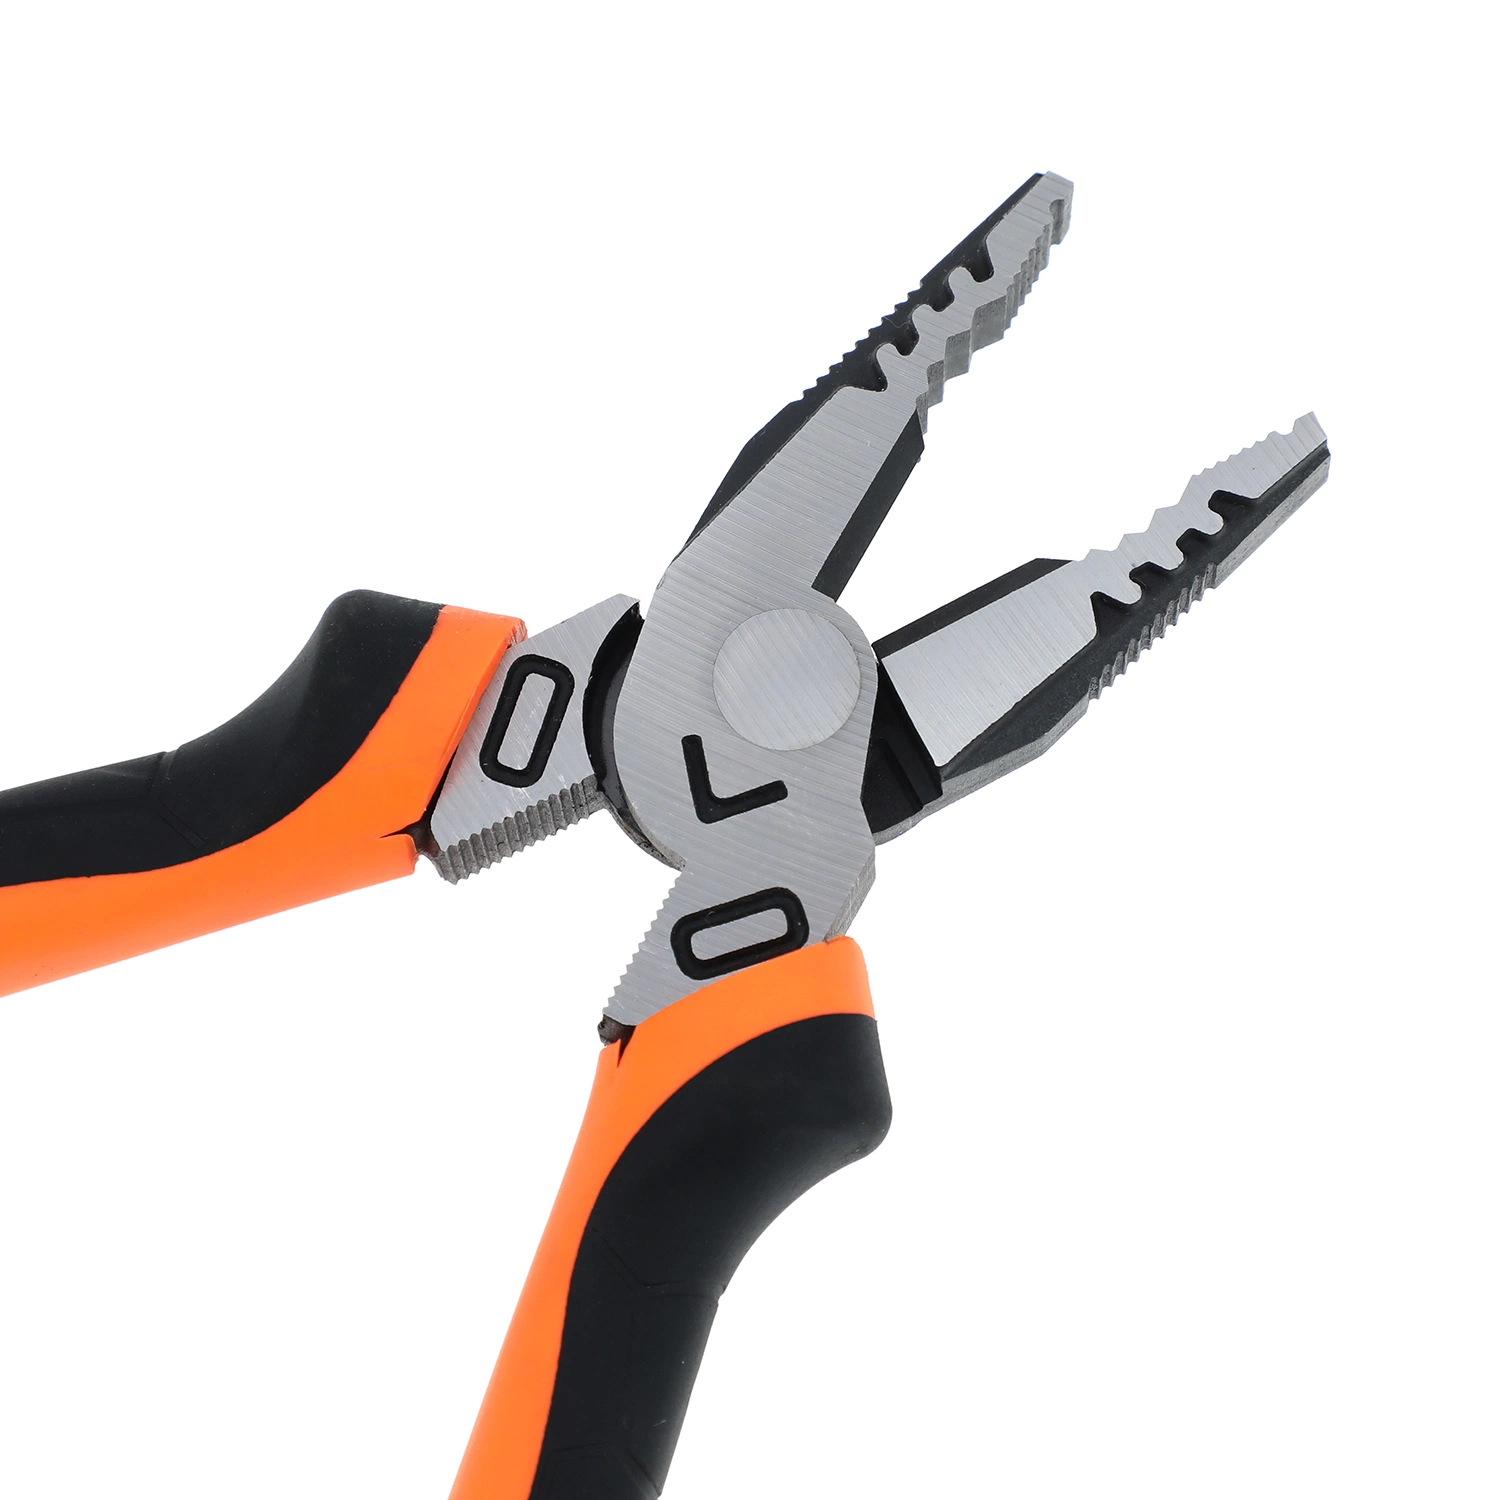 Professional Combination Pliers, Hand Tool, Tools, Long Nose Plier, Made of Cr-V or Cr-Ni, Black and Polish, TPR Handles, Leverage Labor-Saving Pliers